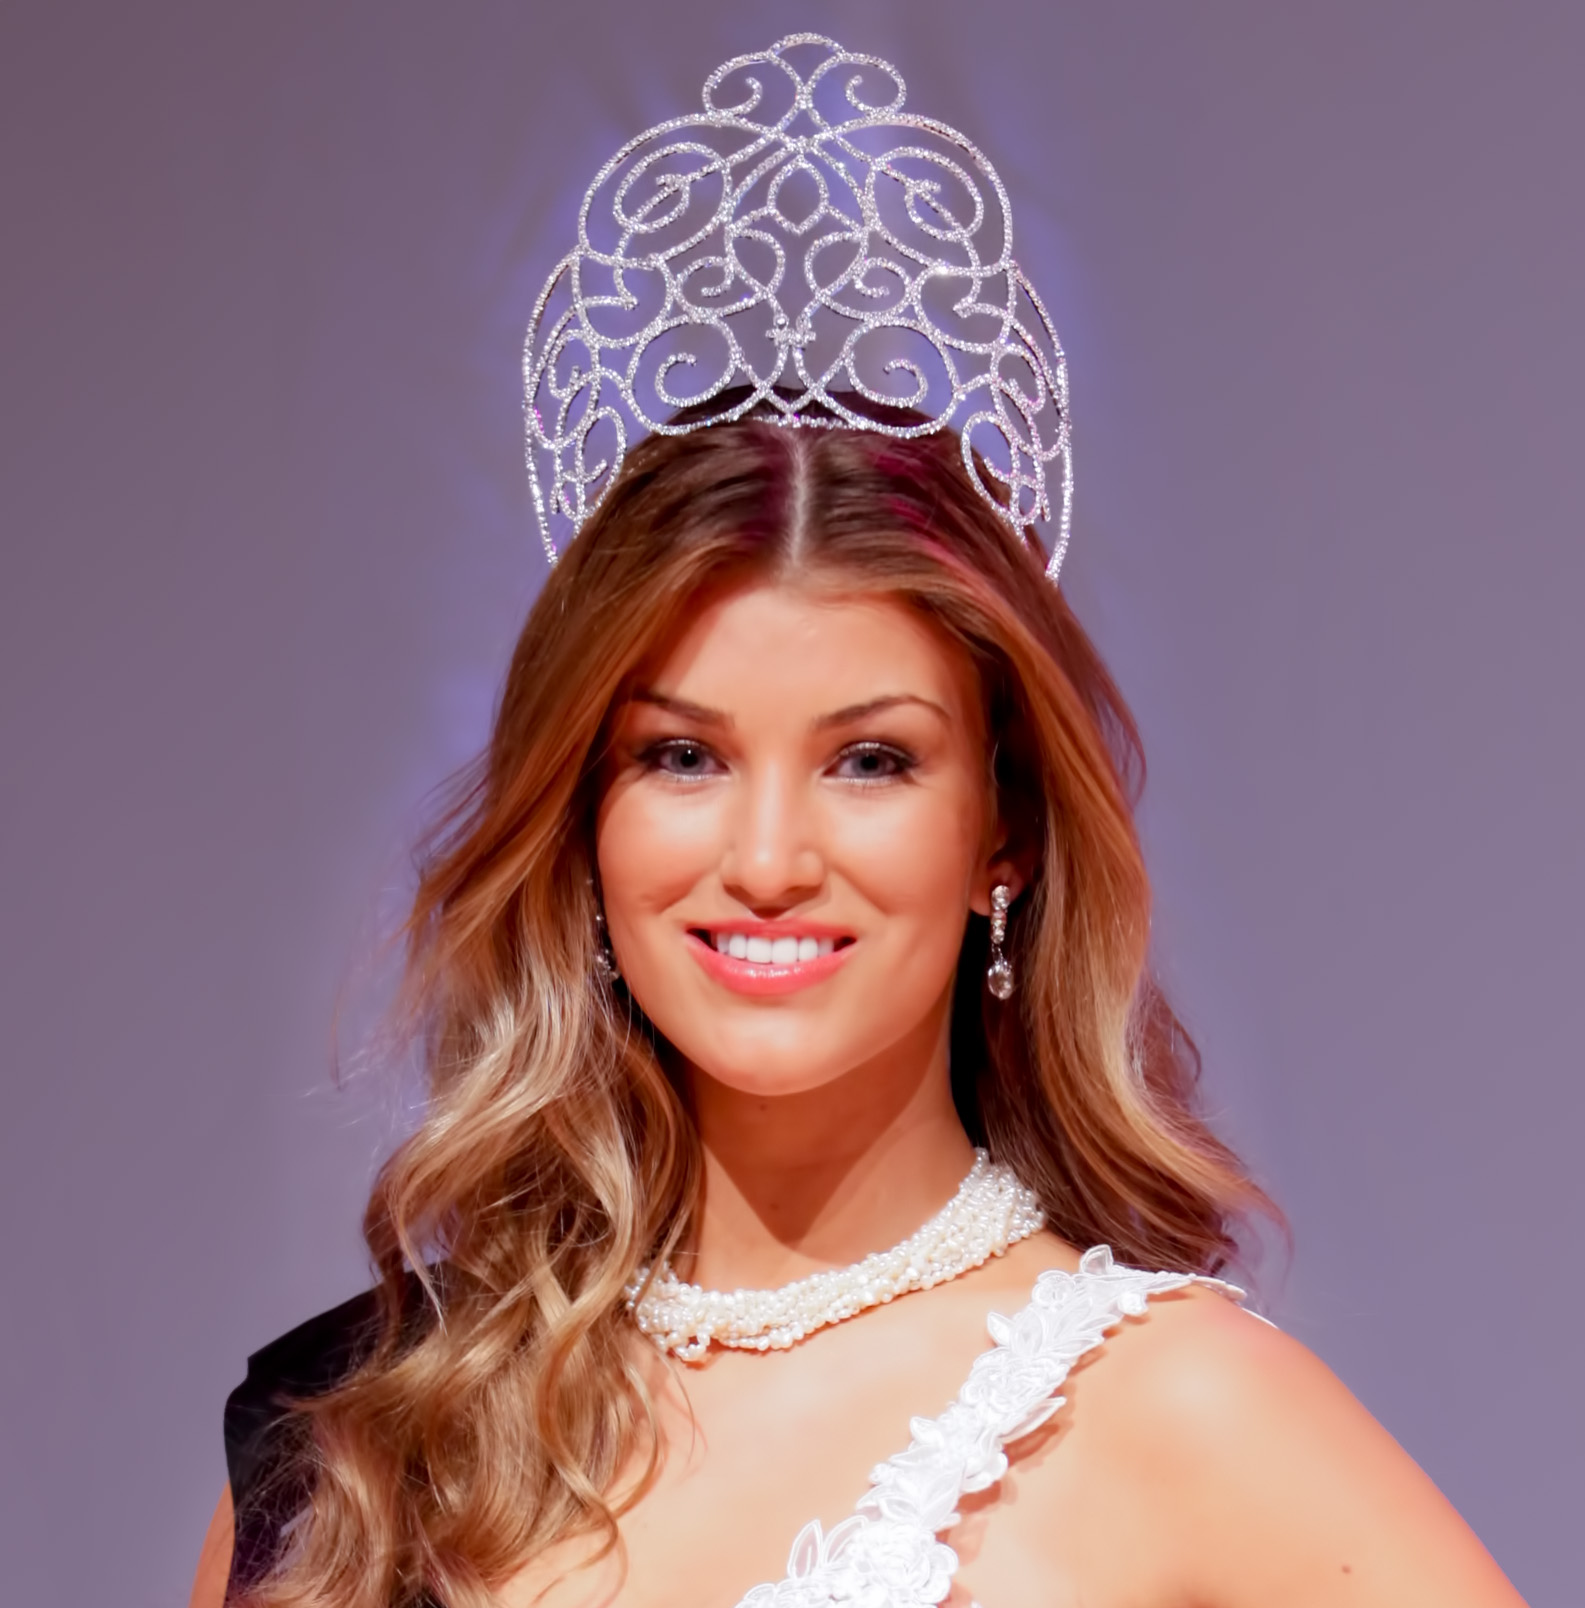 Bristol Beauty Amy Willerton Is Crowned Miss Universe Gb 2013 And Awarded Orchira Pearl Necklace